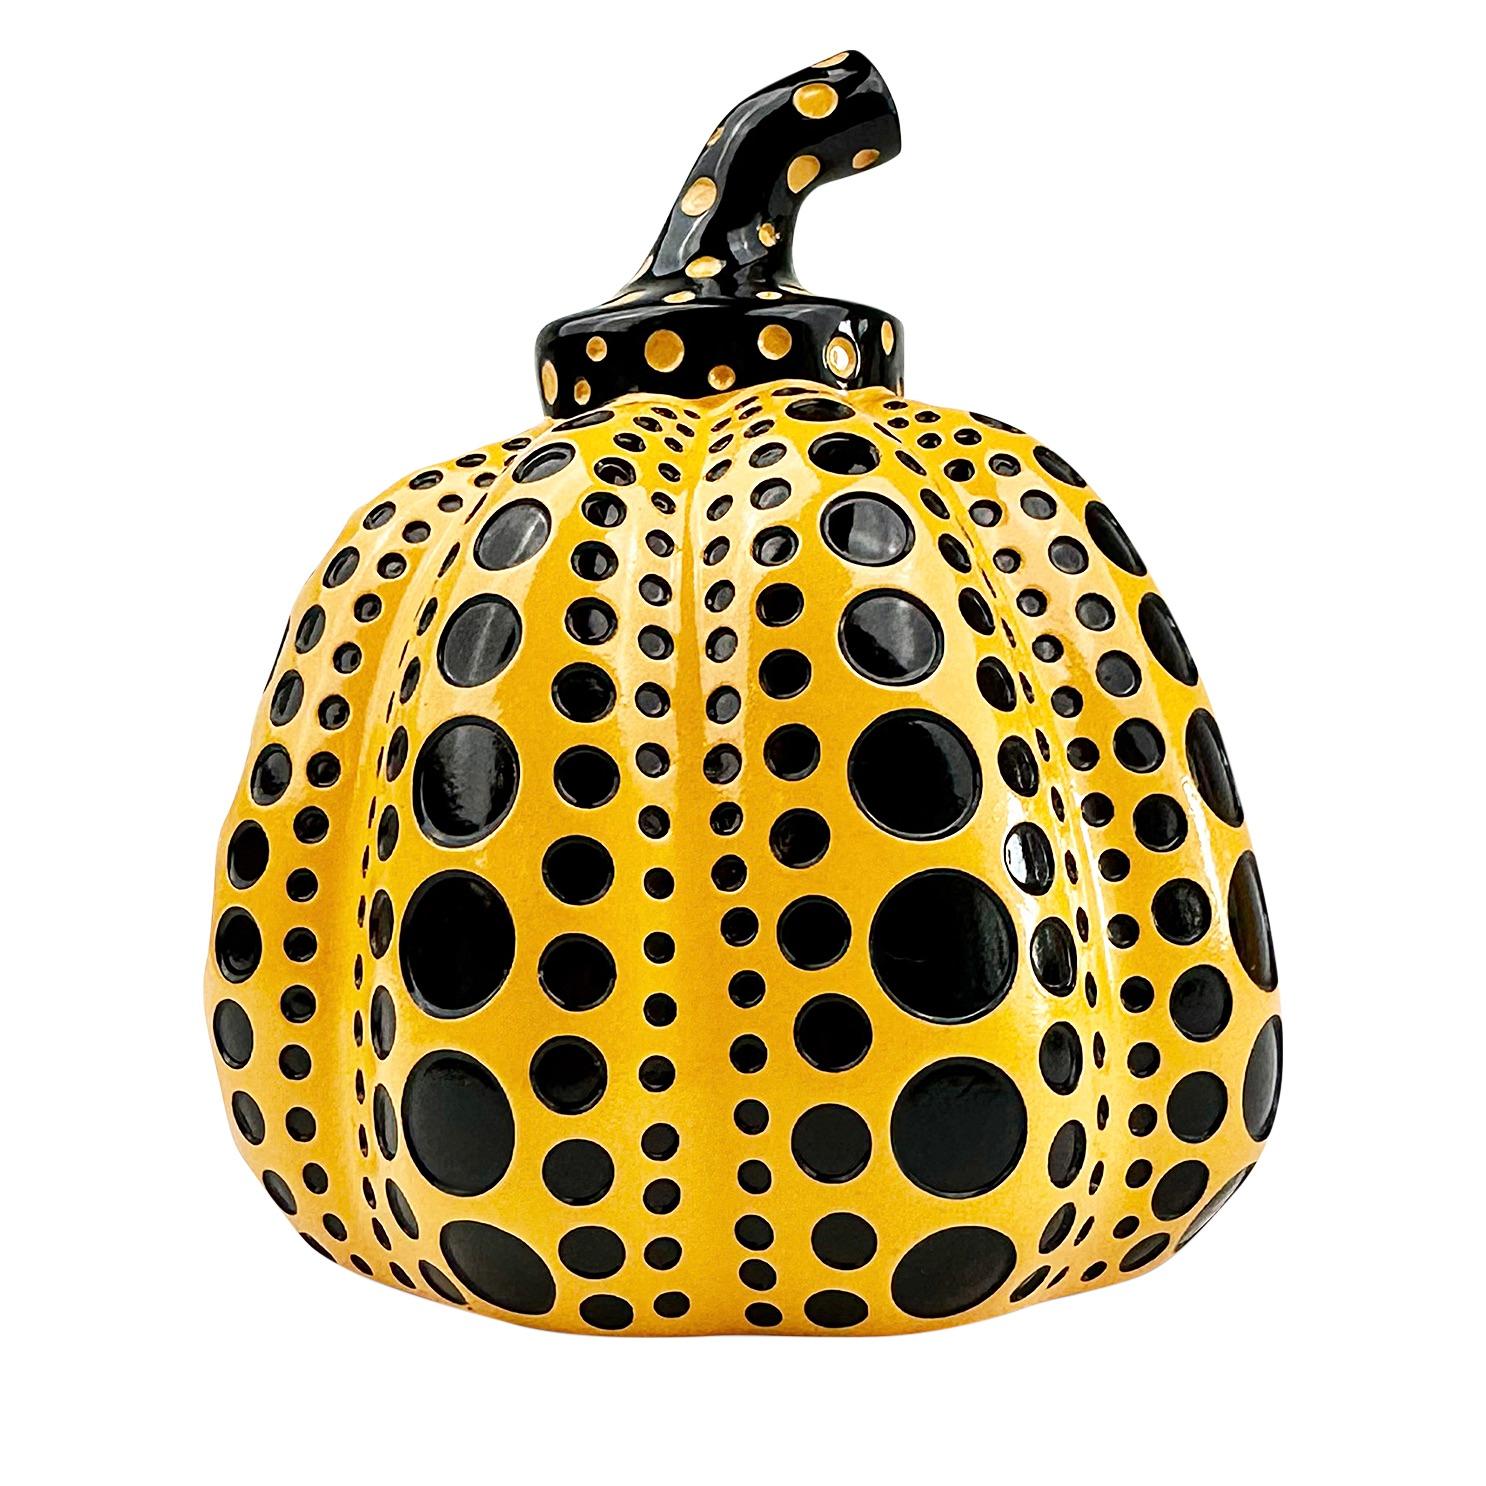 Pumpkins (Yellow & Black & Red & White) Two Painted Sculptures Yayoi Kusama For Sale 4